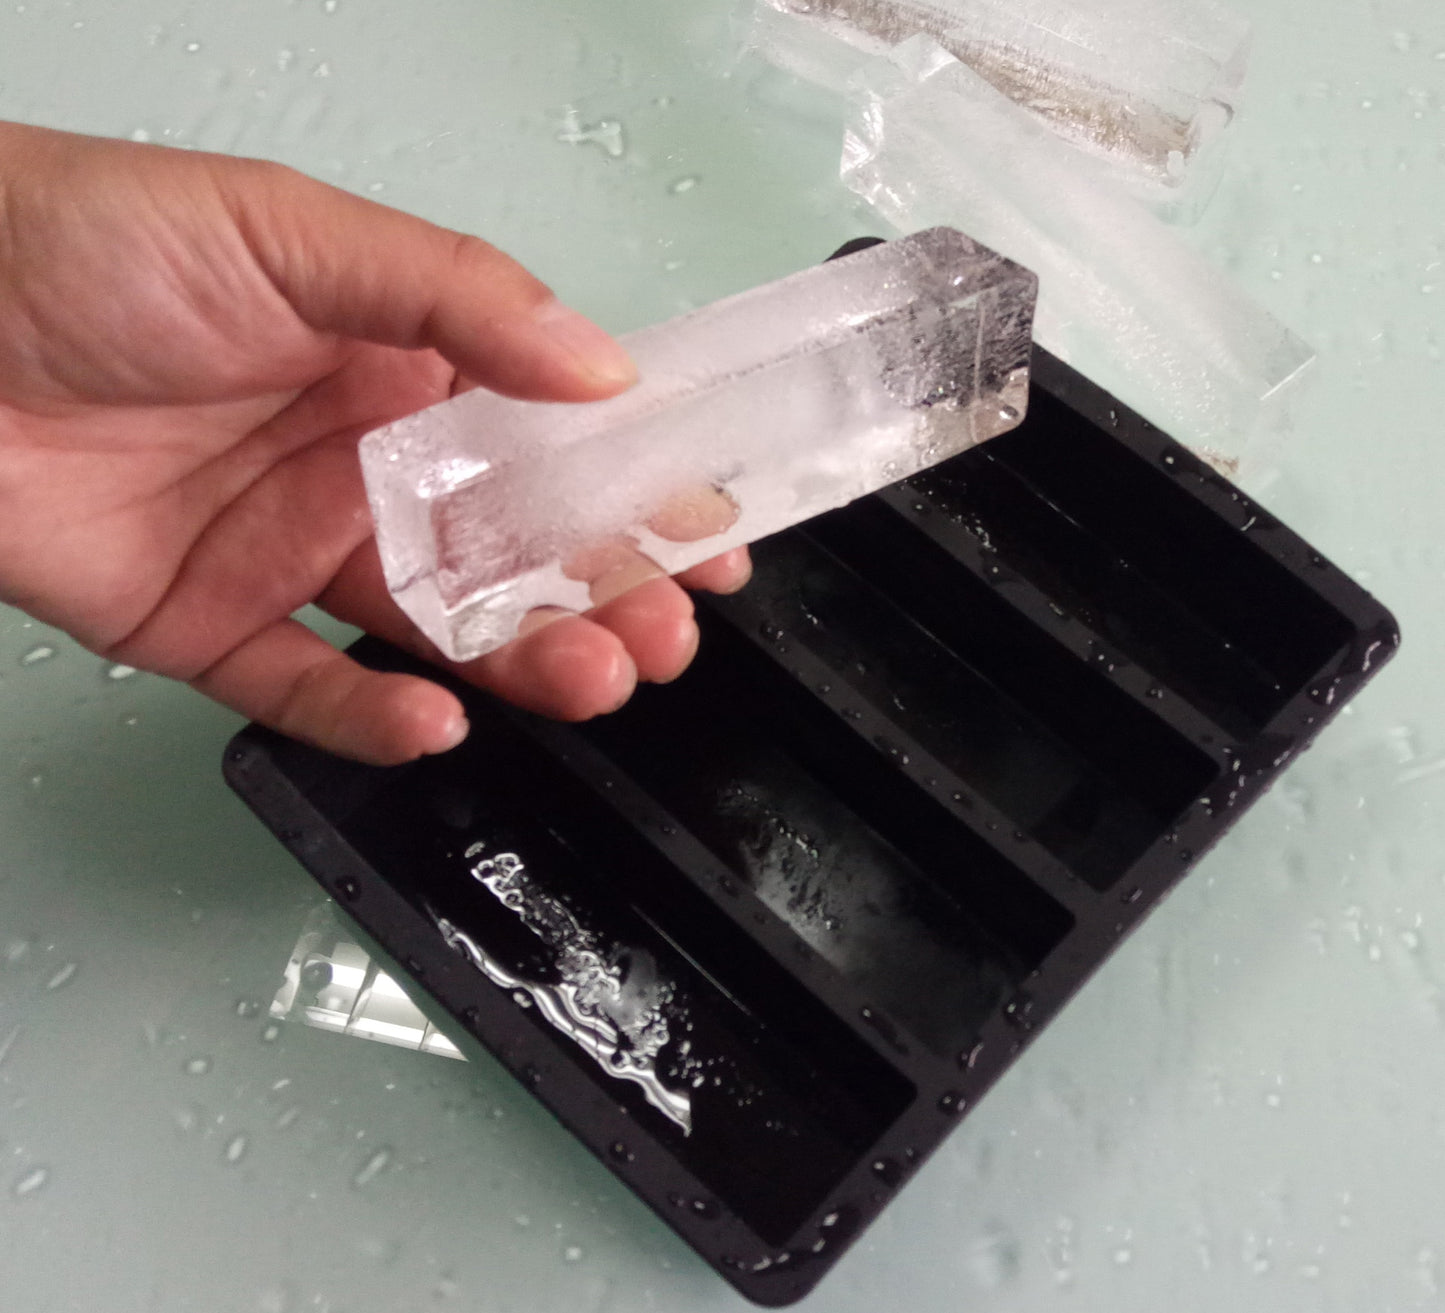 Long Ice Cube Trays for Refreshing Beverages"